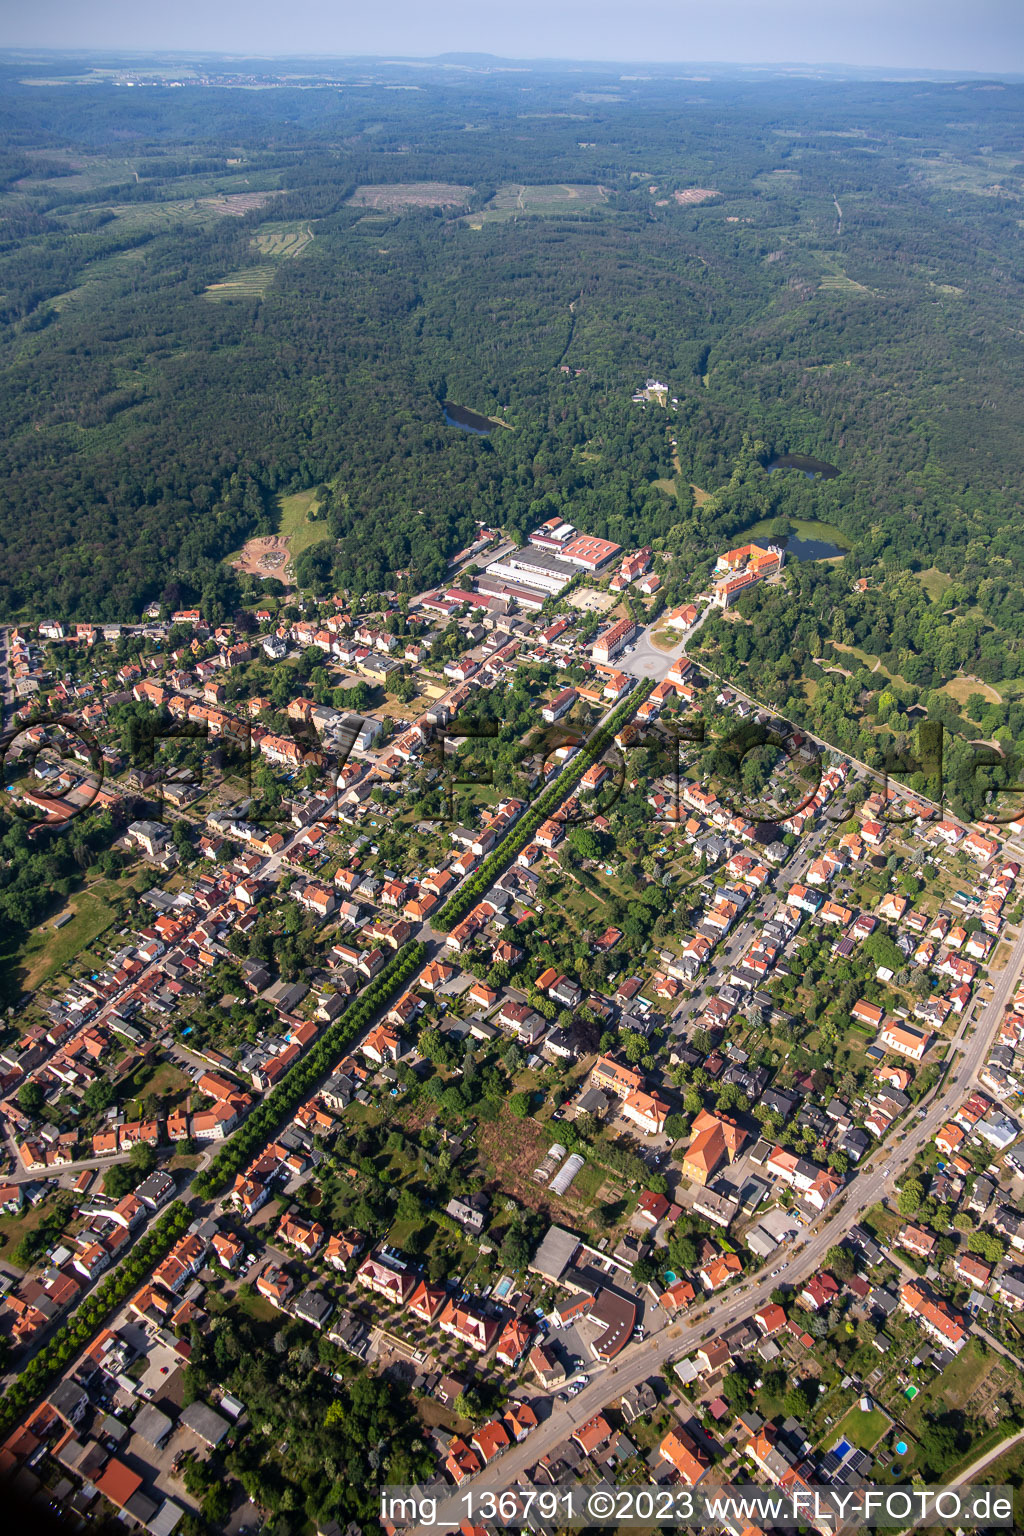 Oblique view of Avenue to the castle in Ballenstedt in the state Saxony-Anhalt, Germany